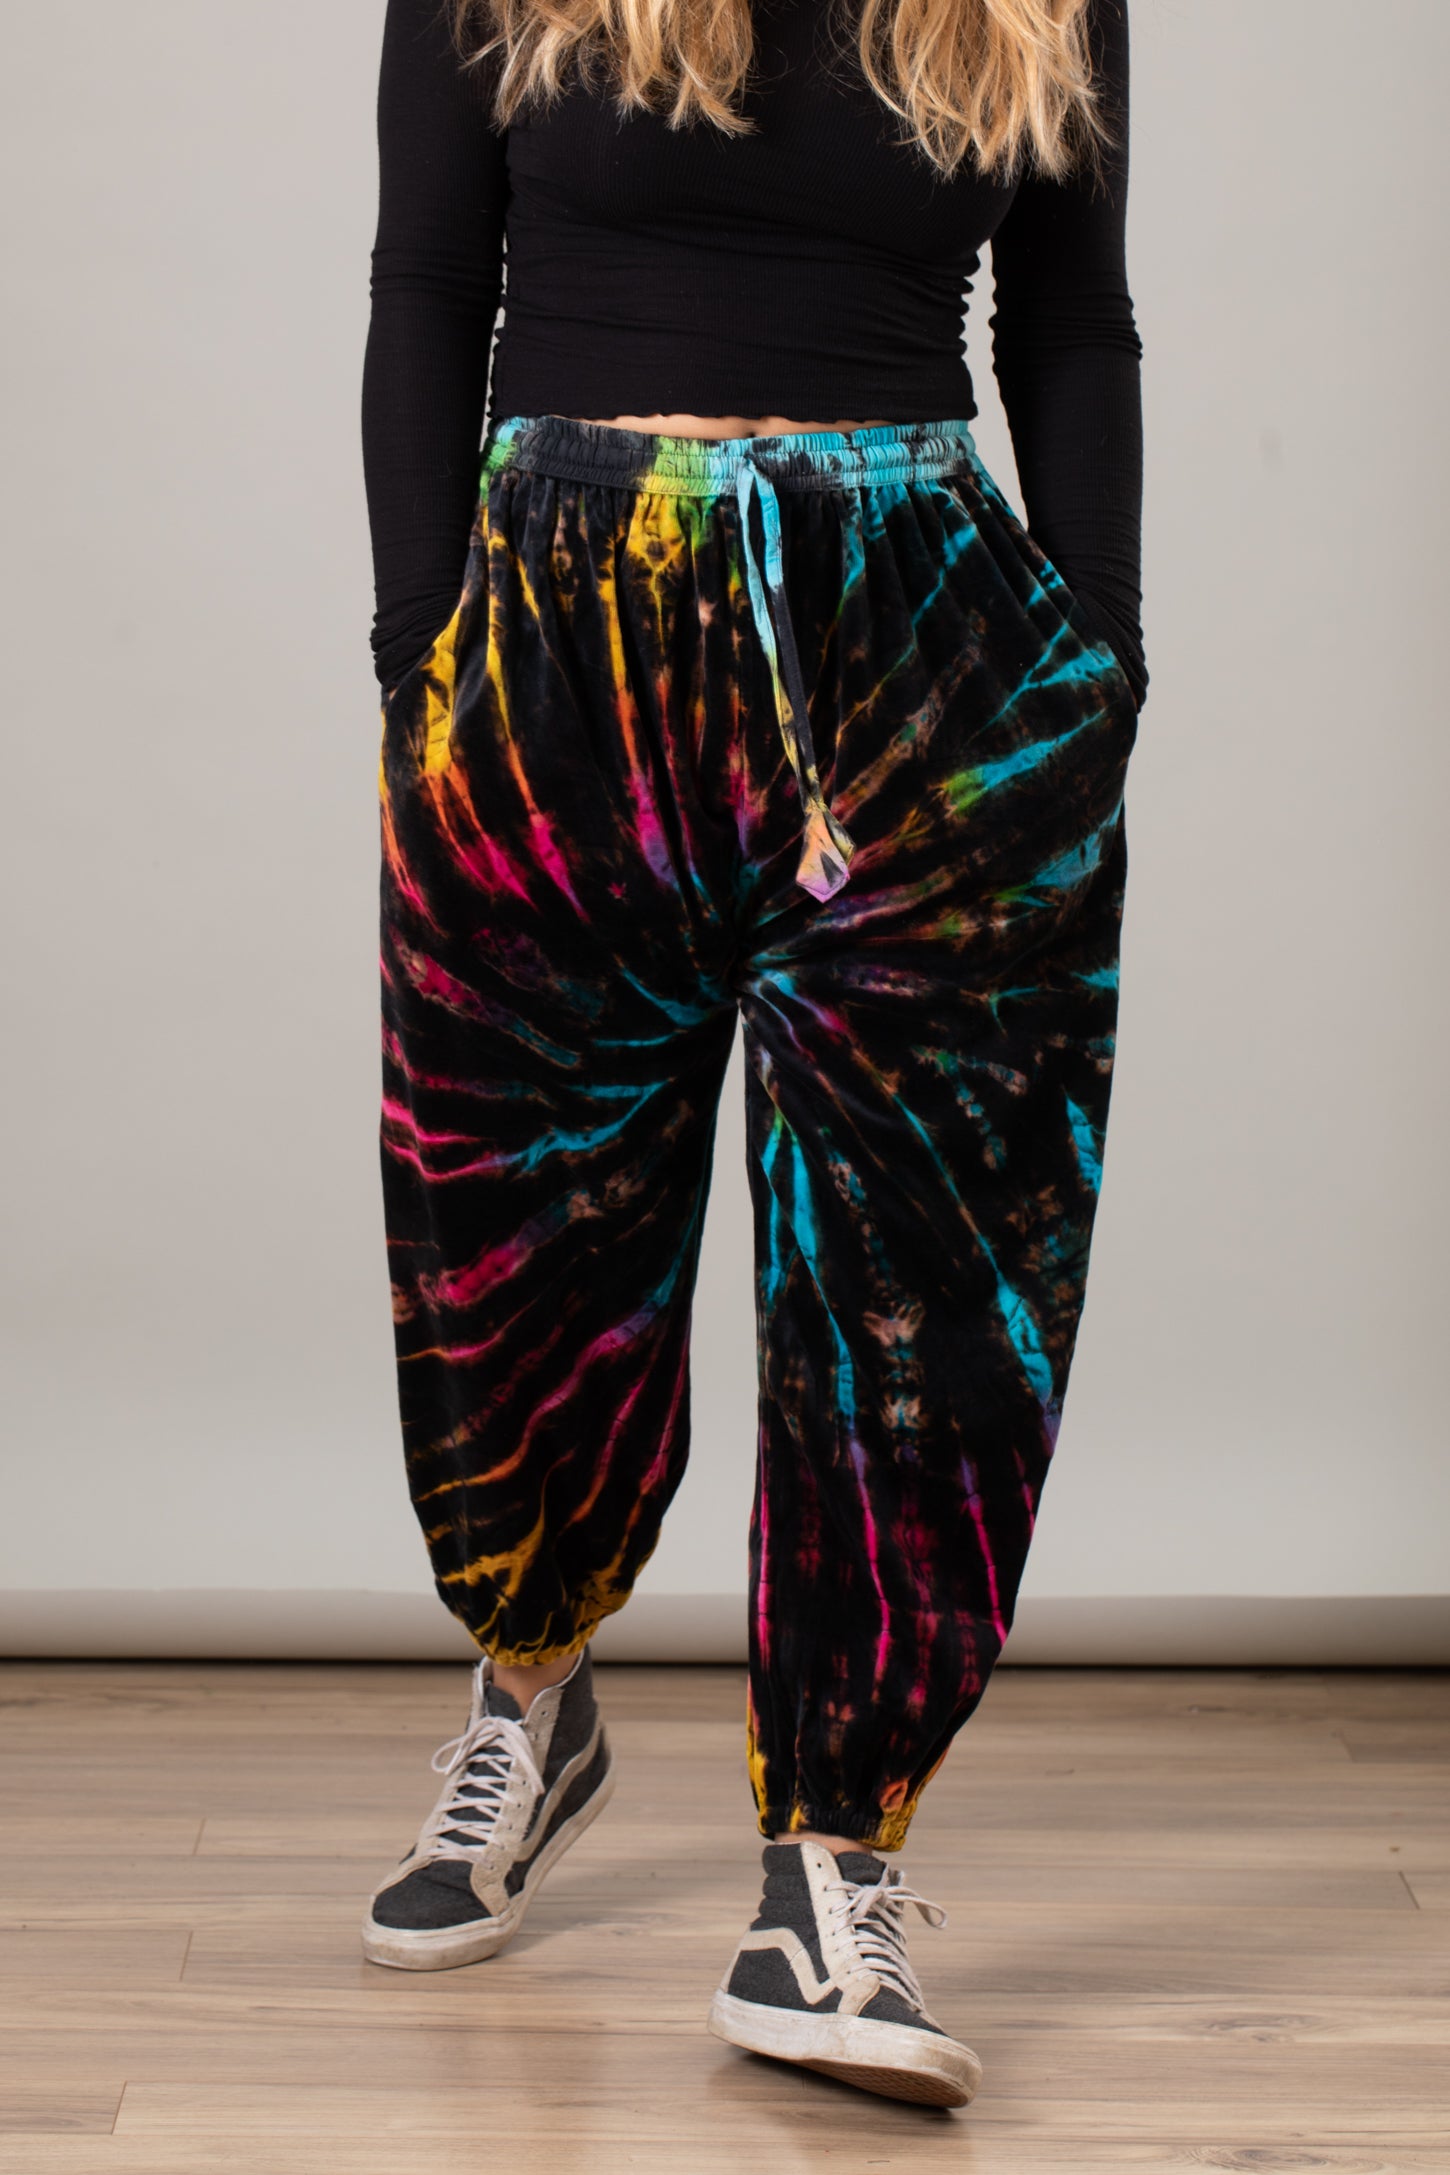 Cotton Candy Tie Dye Pants - Young Christians Apparels